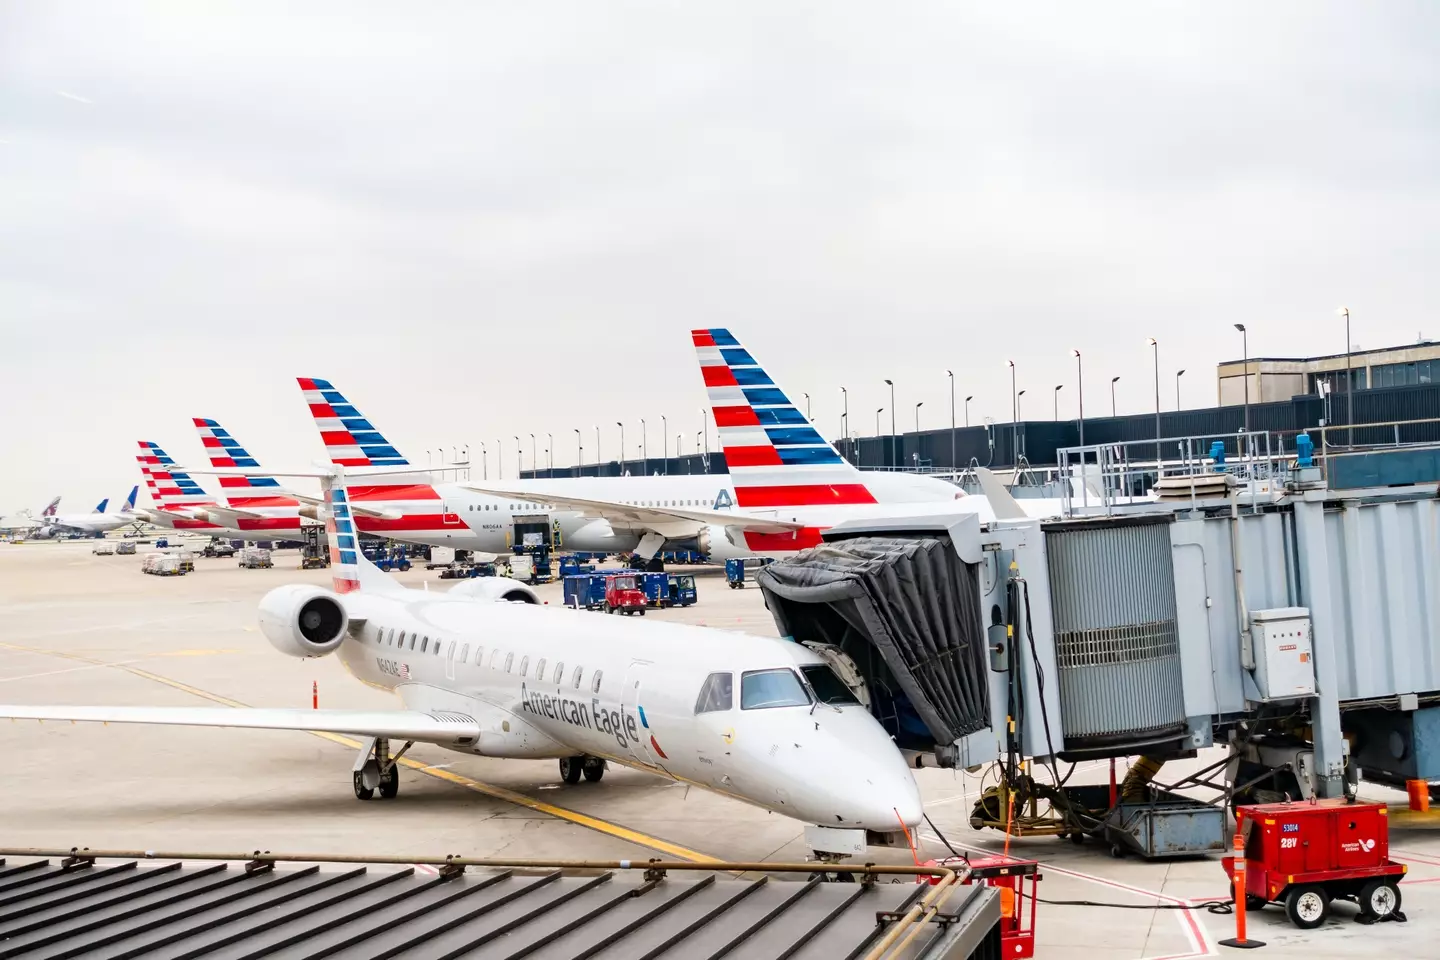 American Airlines has accused the site of deception.